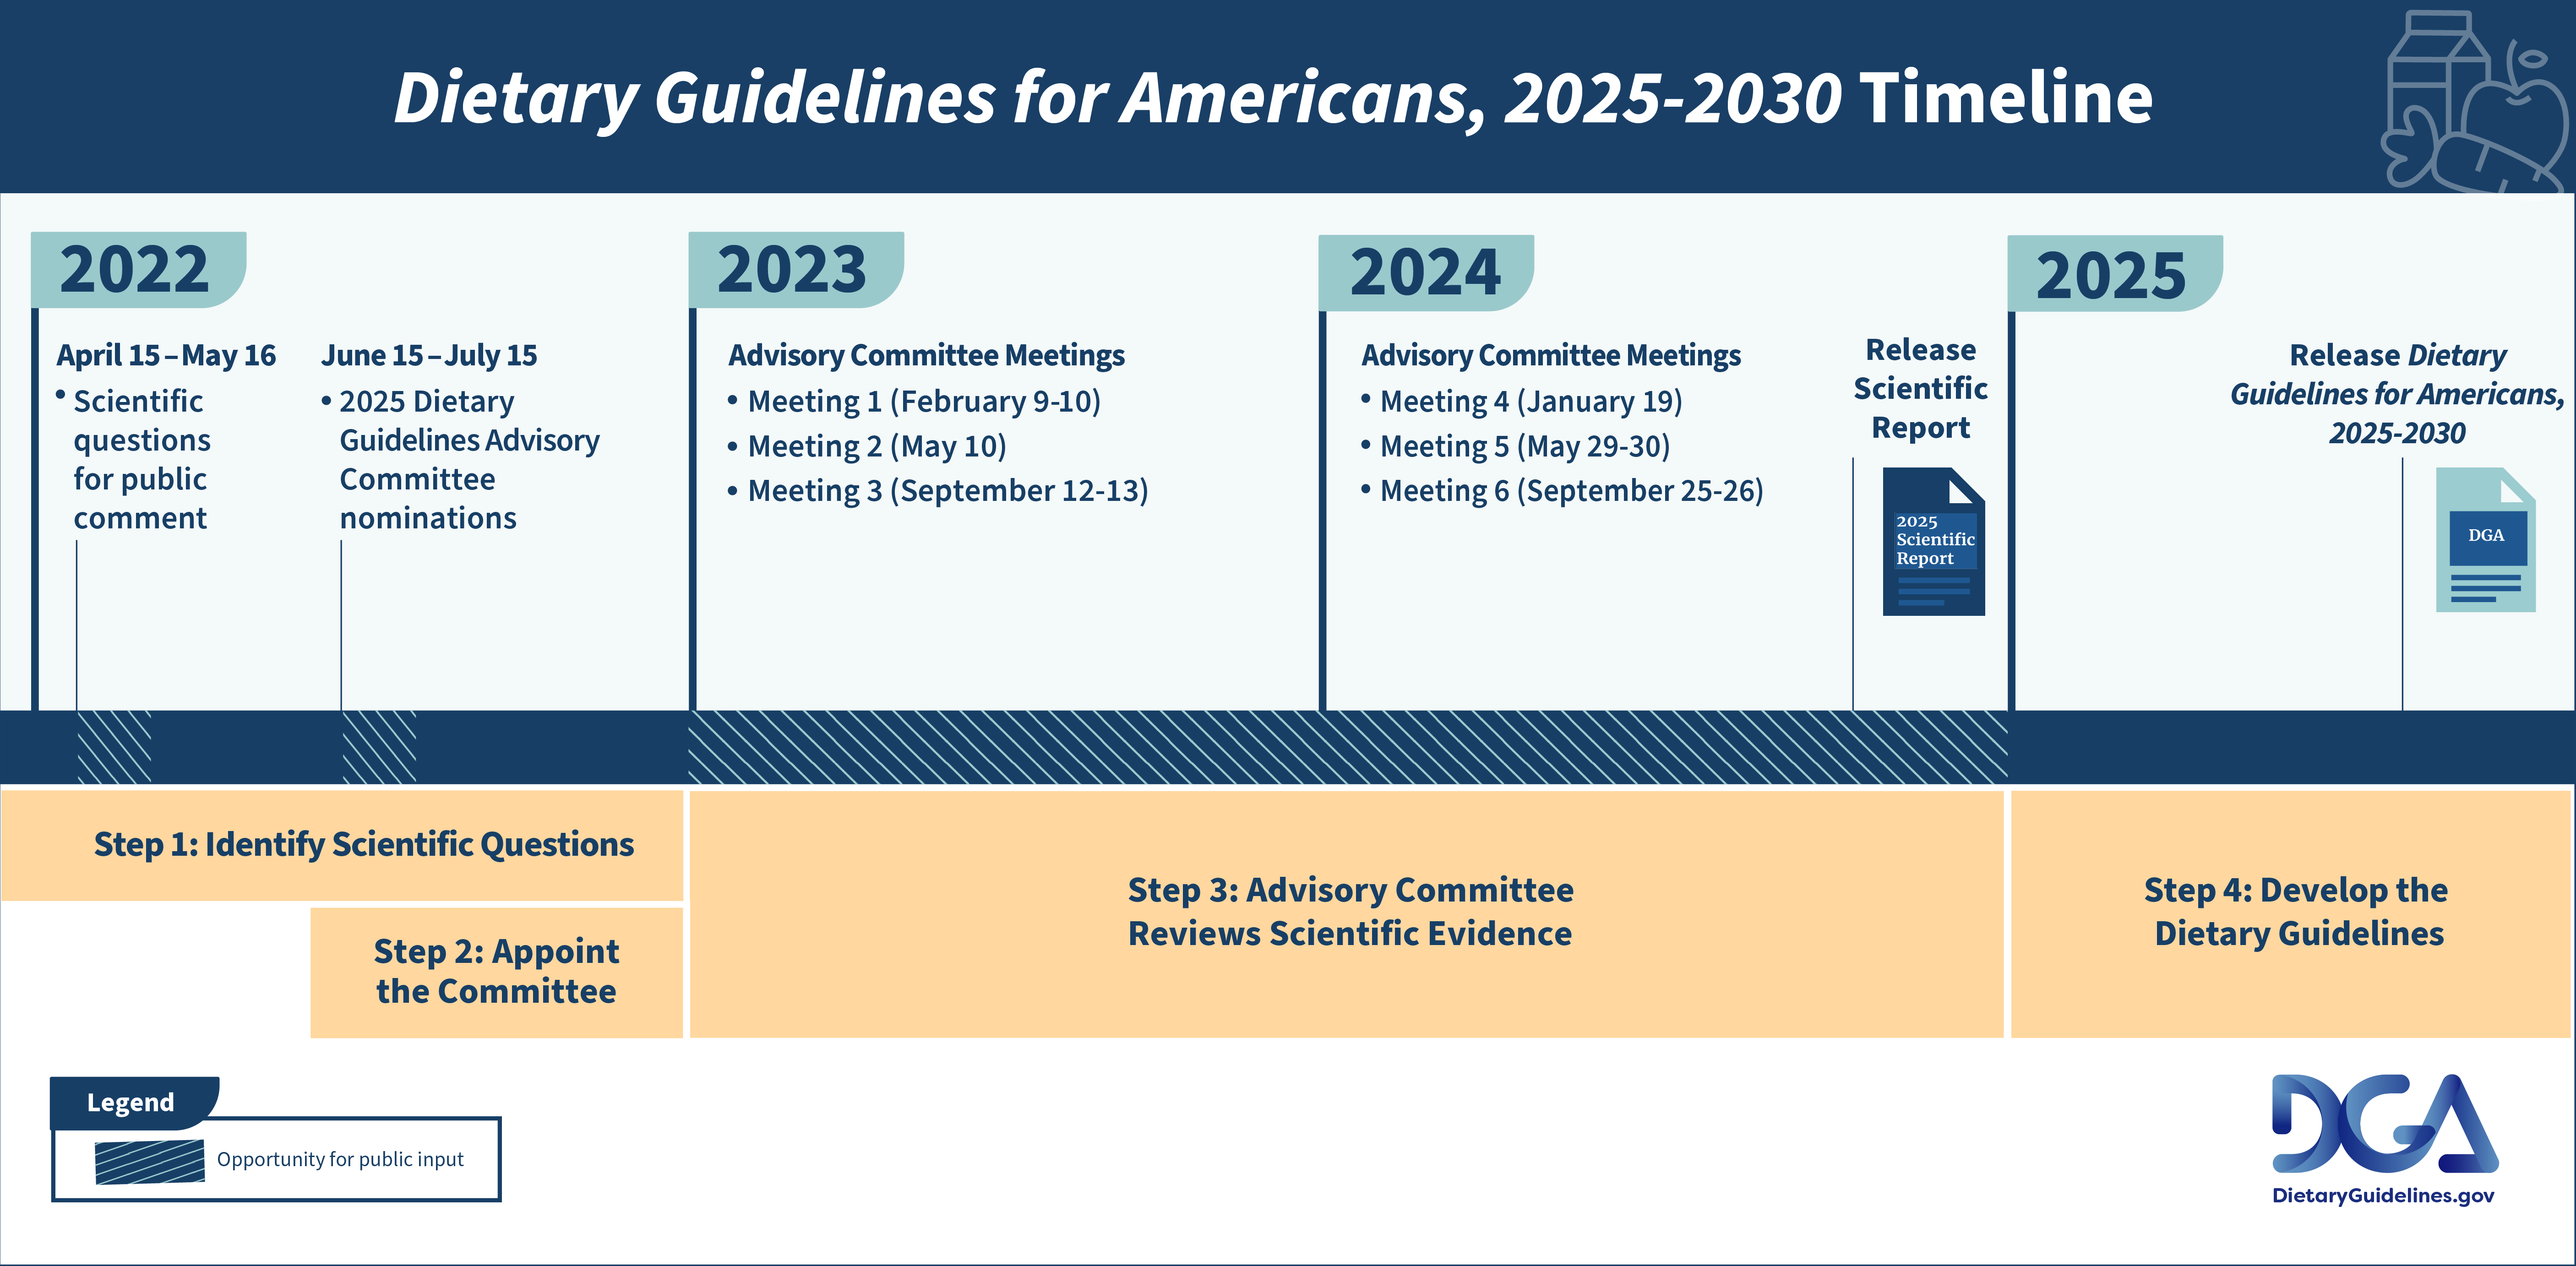 timeline of Dietary Guidelines 2022-2025